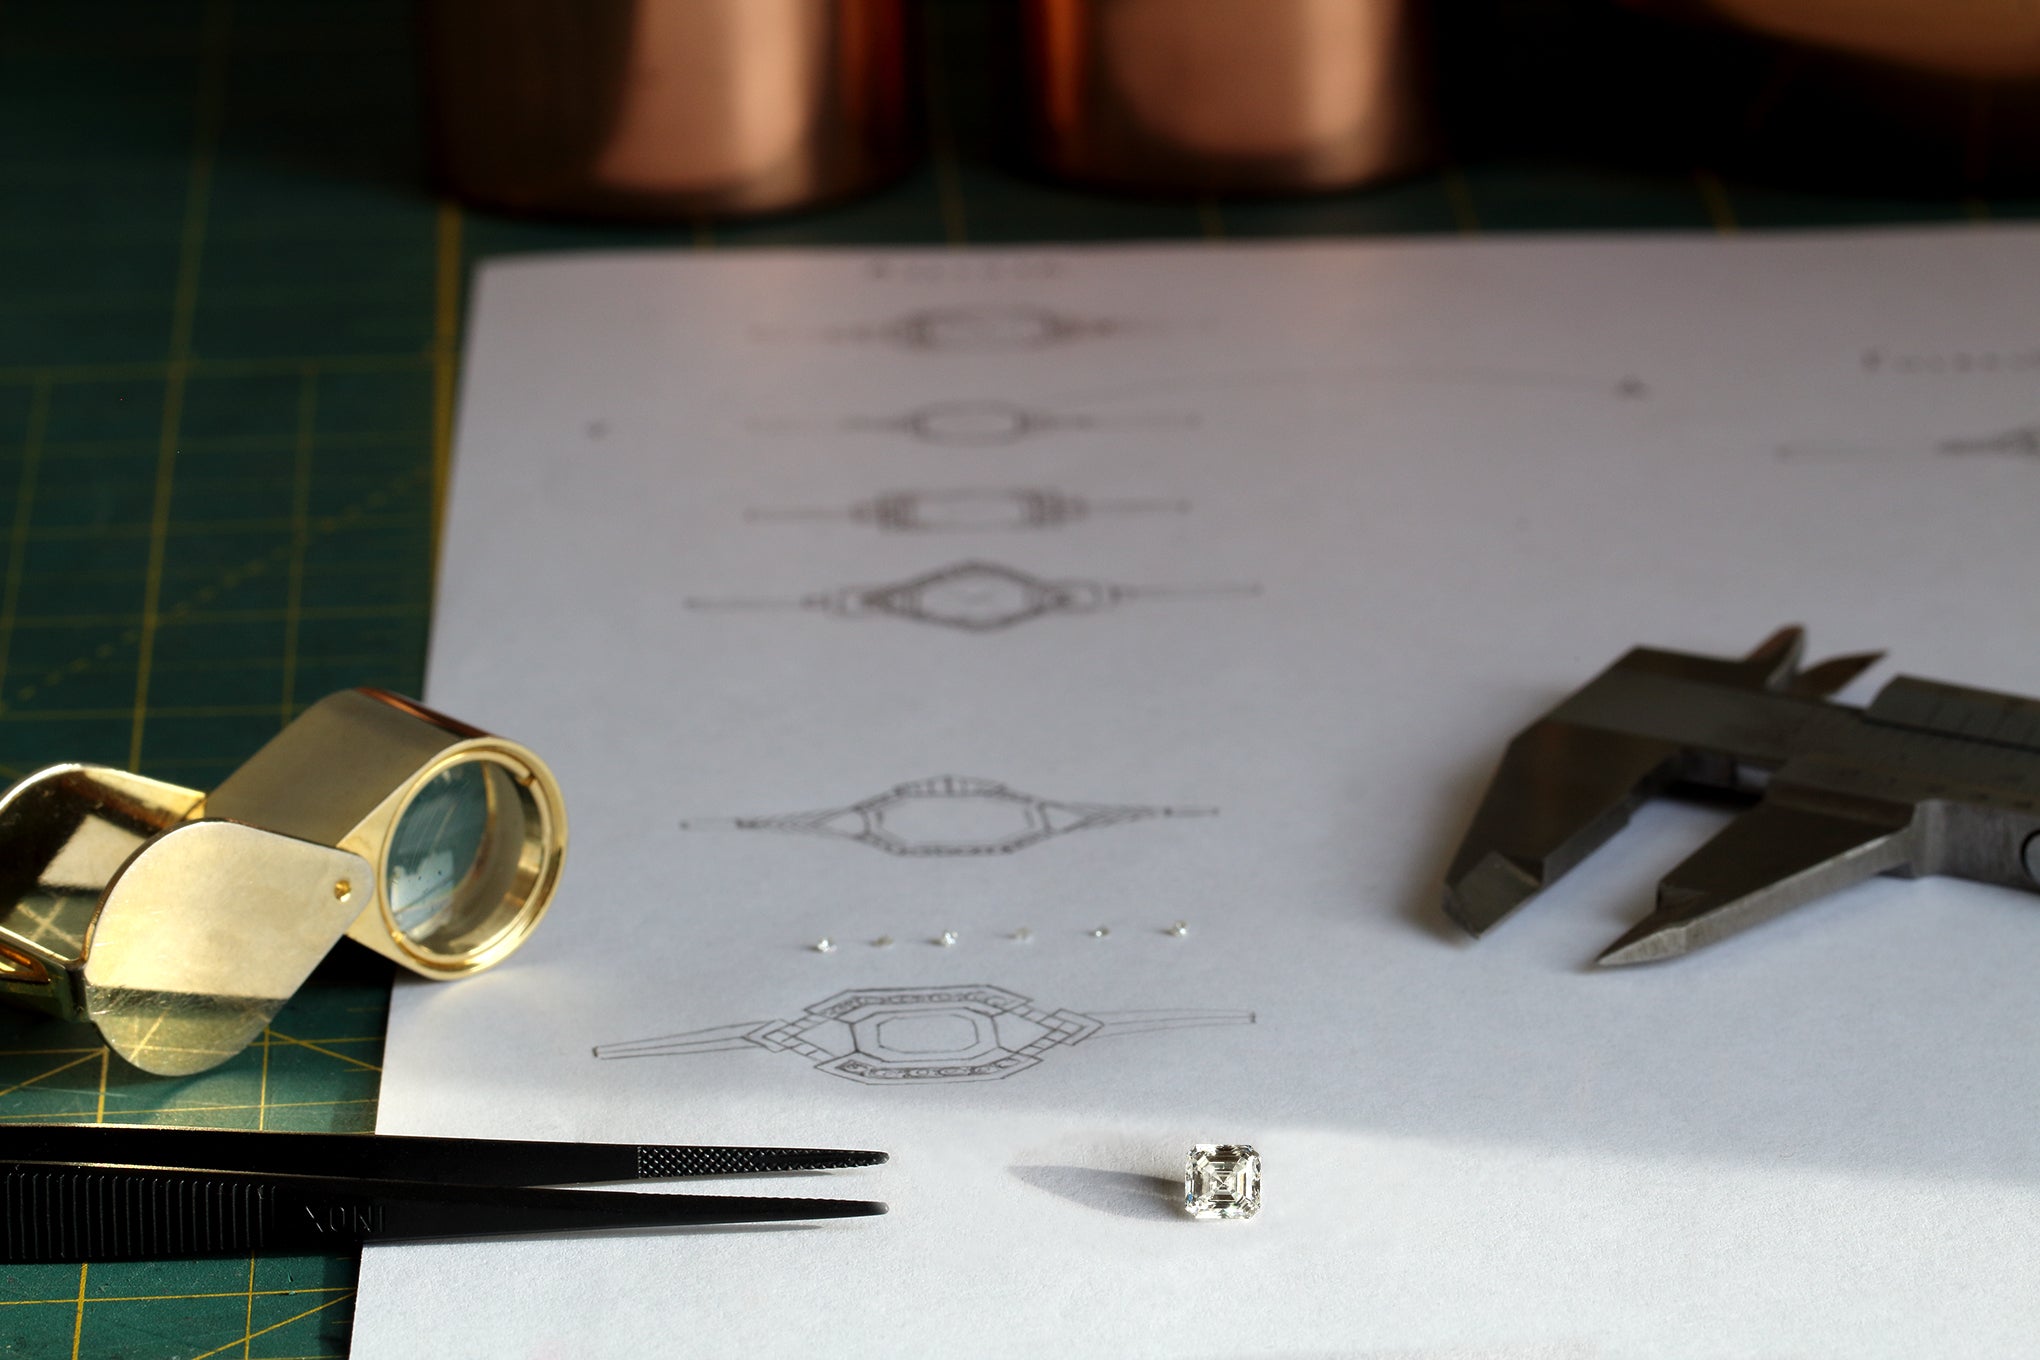 Designing an engagement ring, with diamond, tweezers and calipers